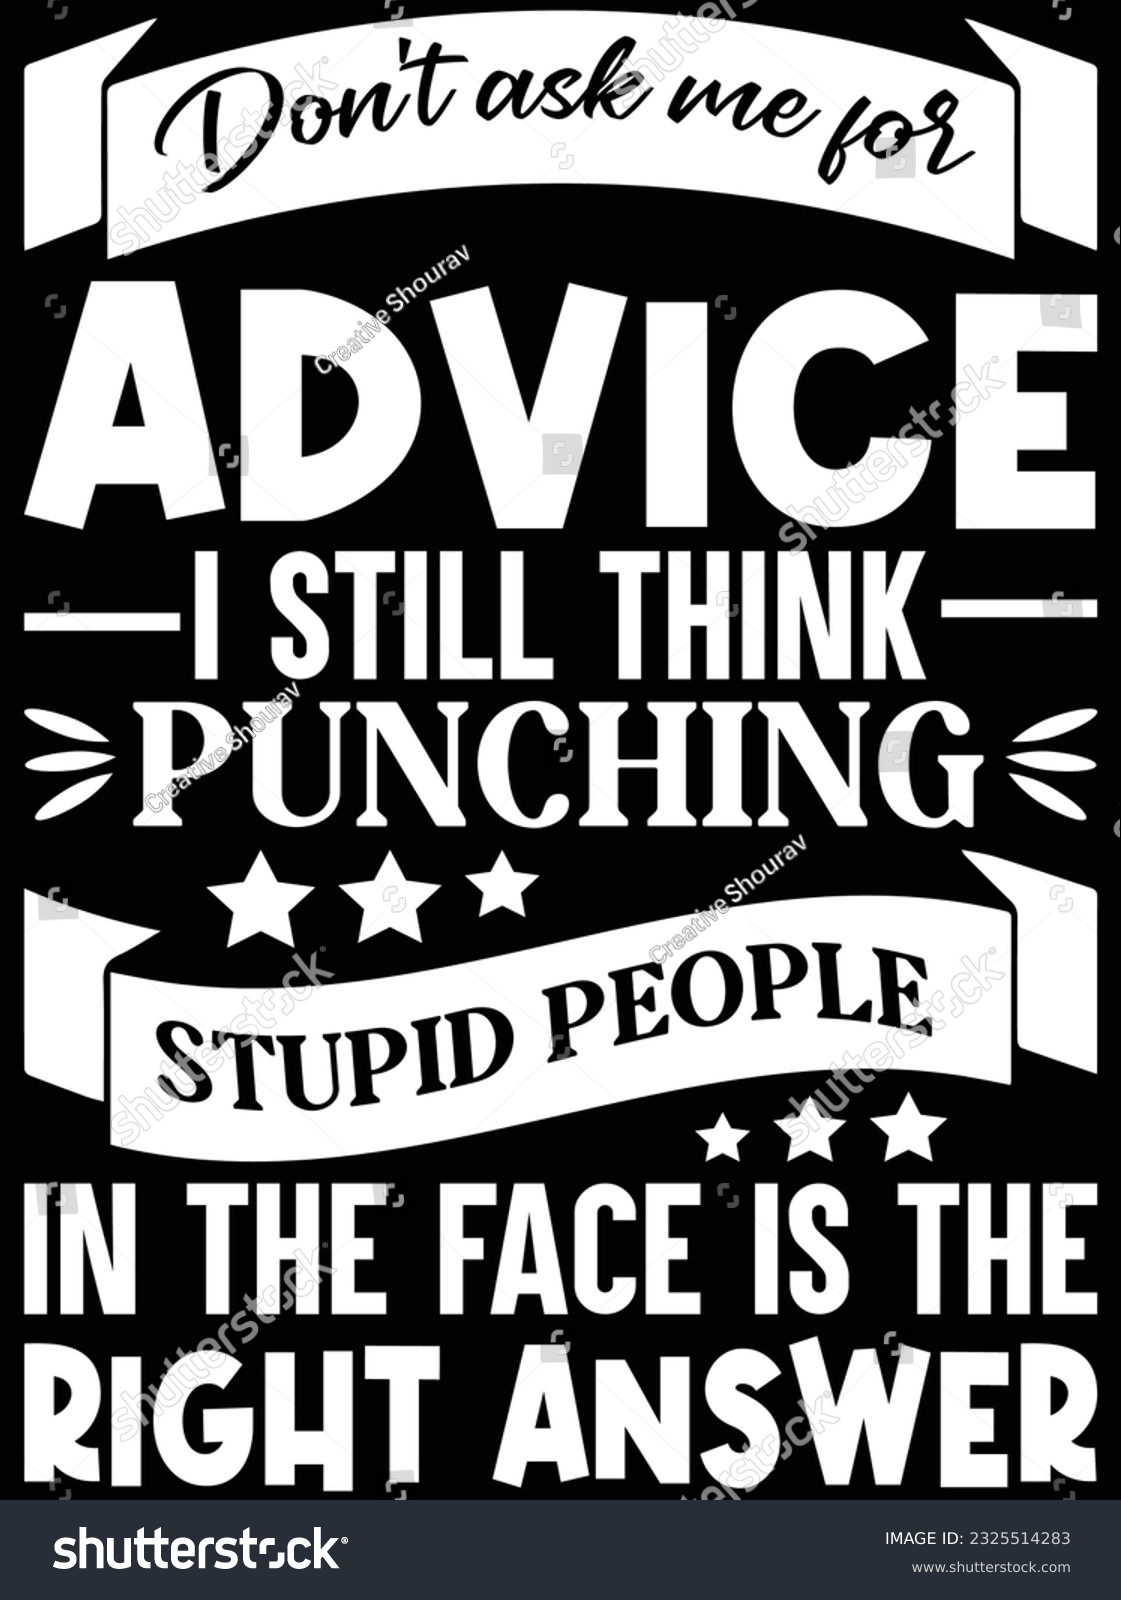 SVG of Don't ask me for advice I still think punching stupid people vector art design, eps file. design file for t-shirt. SVG, EPS cuttable design file svg